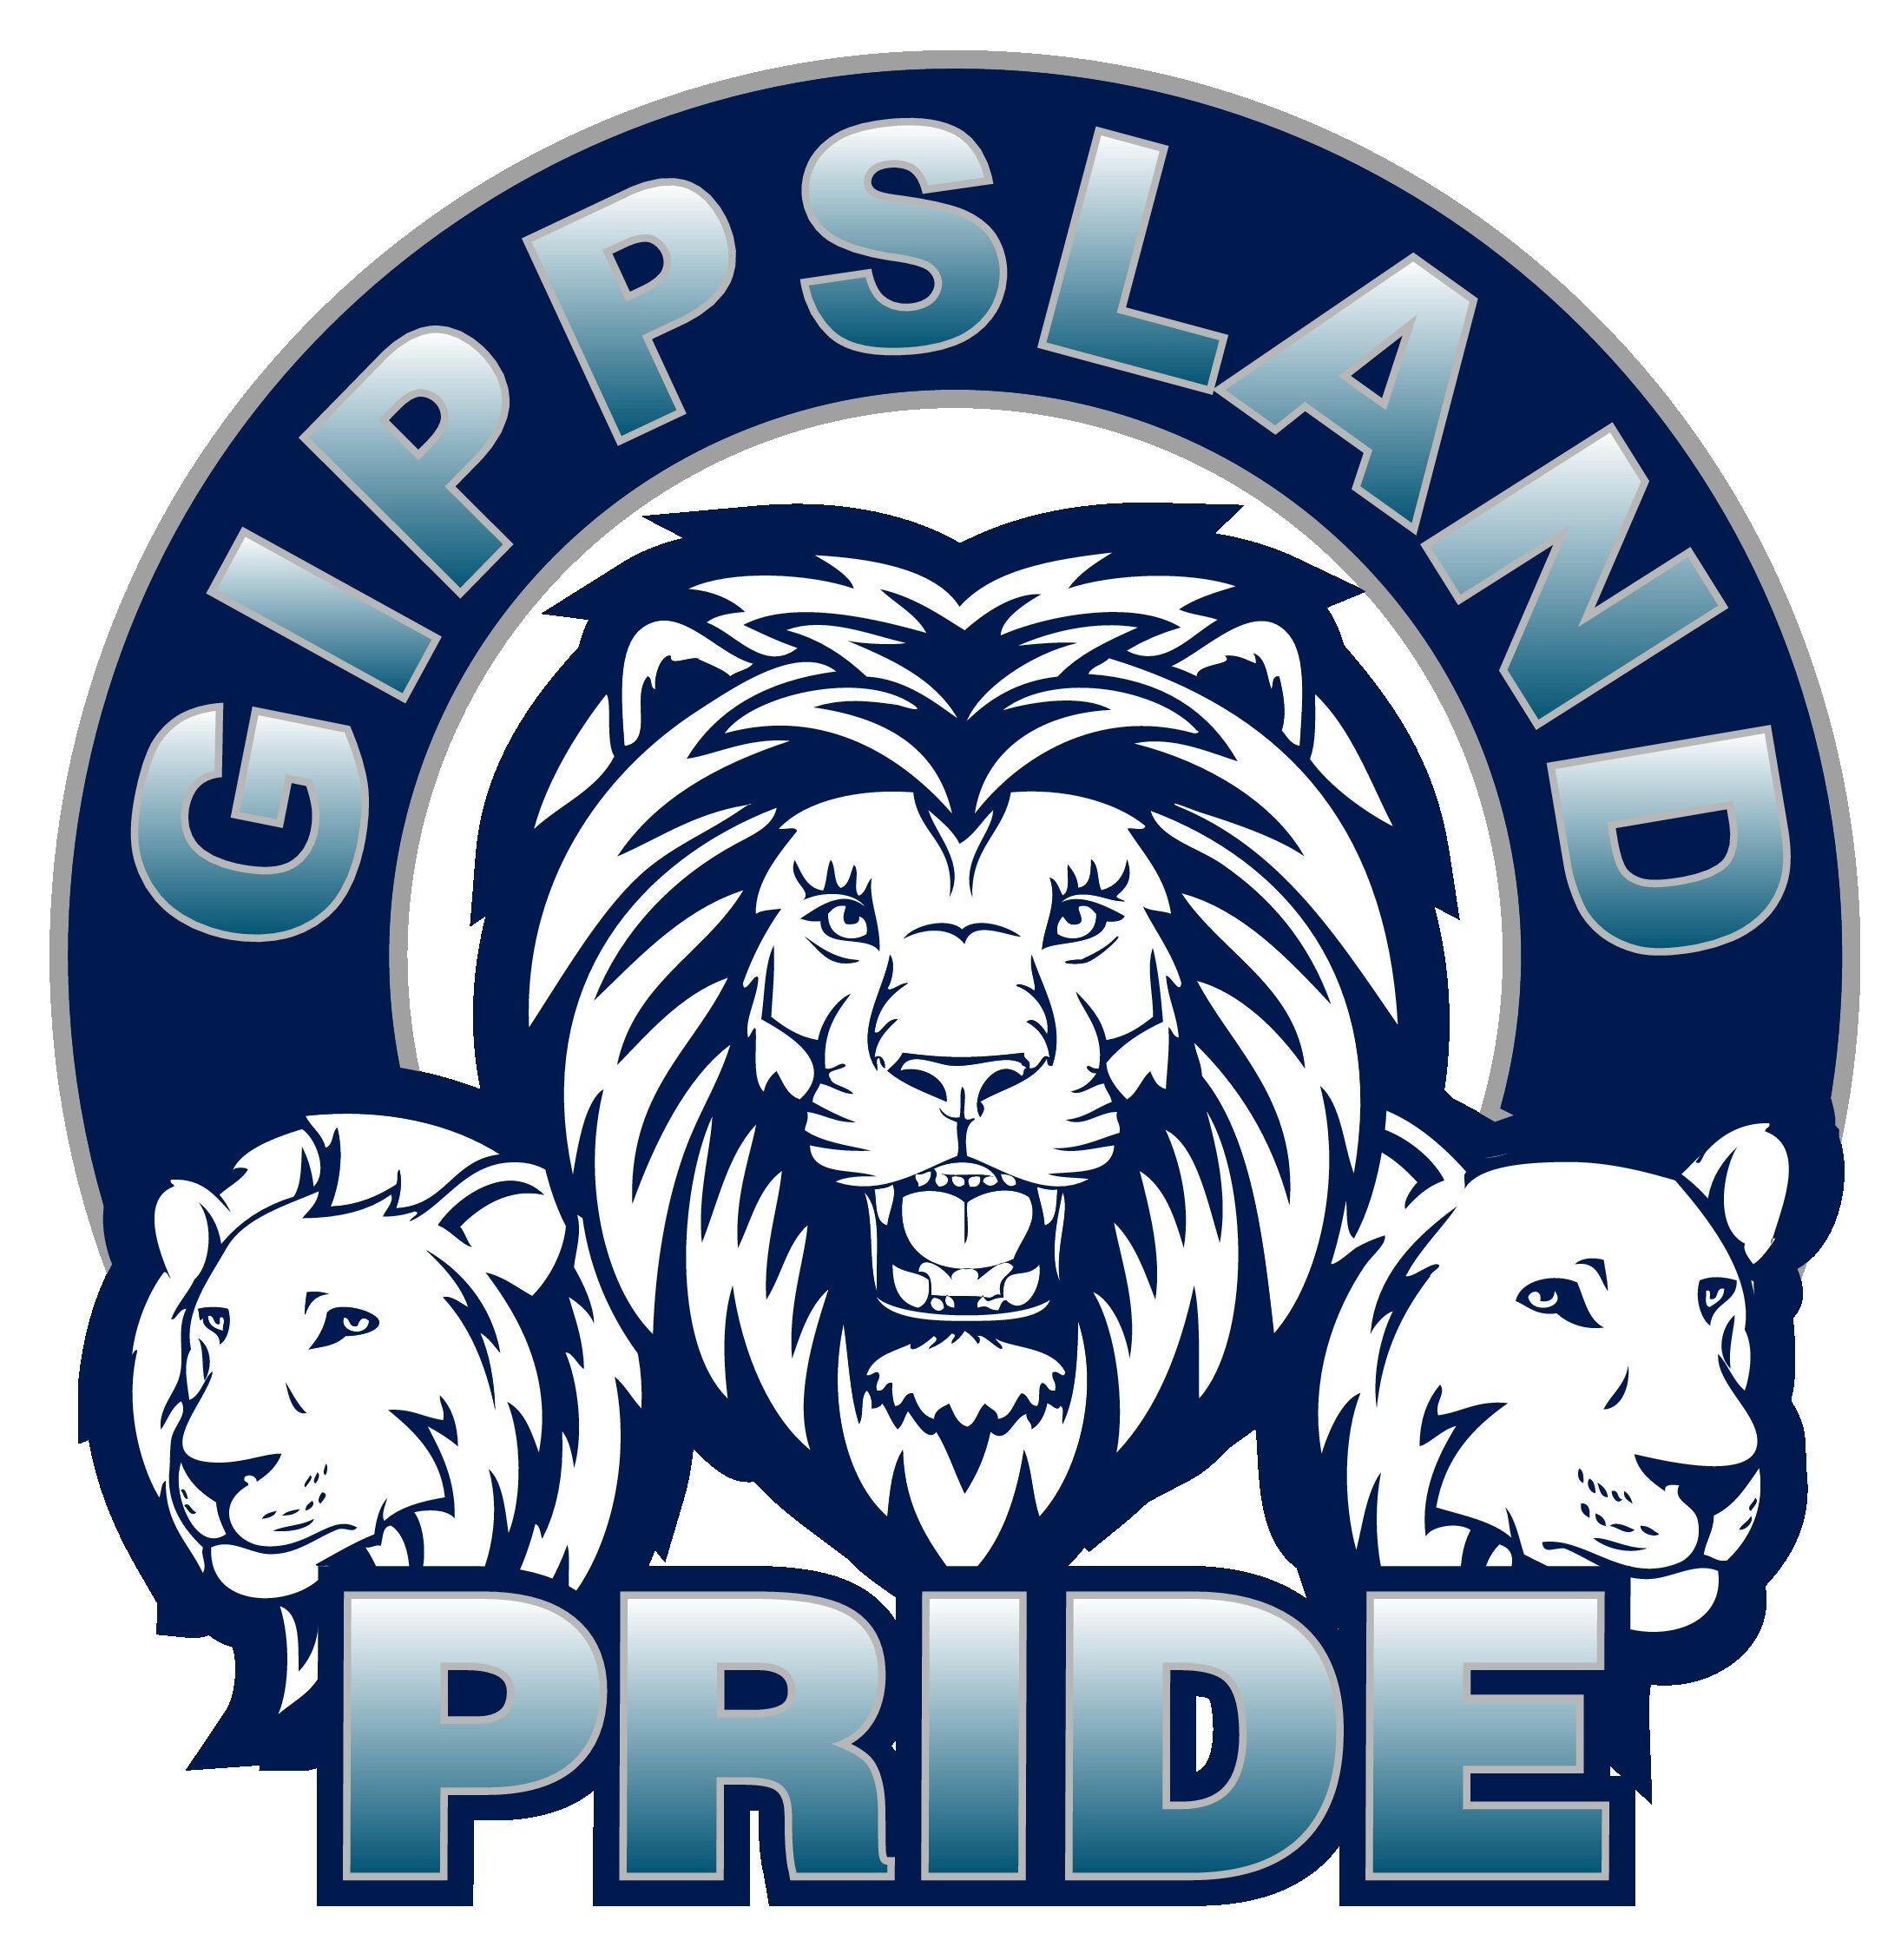 Gippsland Pride is the name used by all  teams representing VCCL Region 7 in elite cricket competitions.